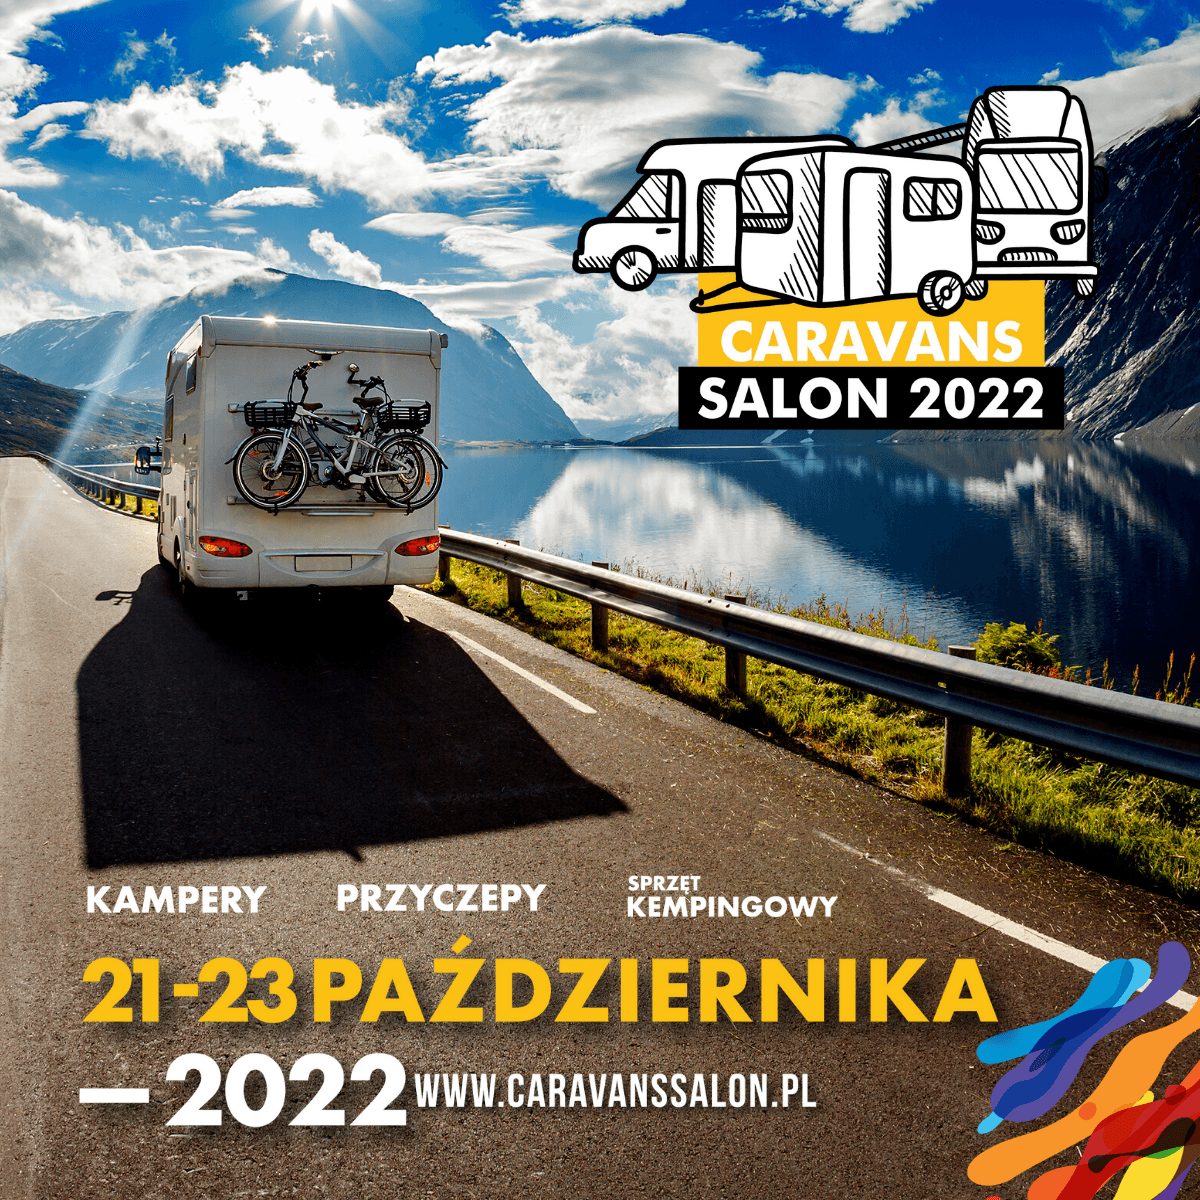 Caravans Salon is working intensively on the Caravanning Festival in Poznań – image 1